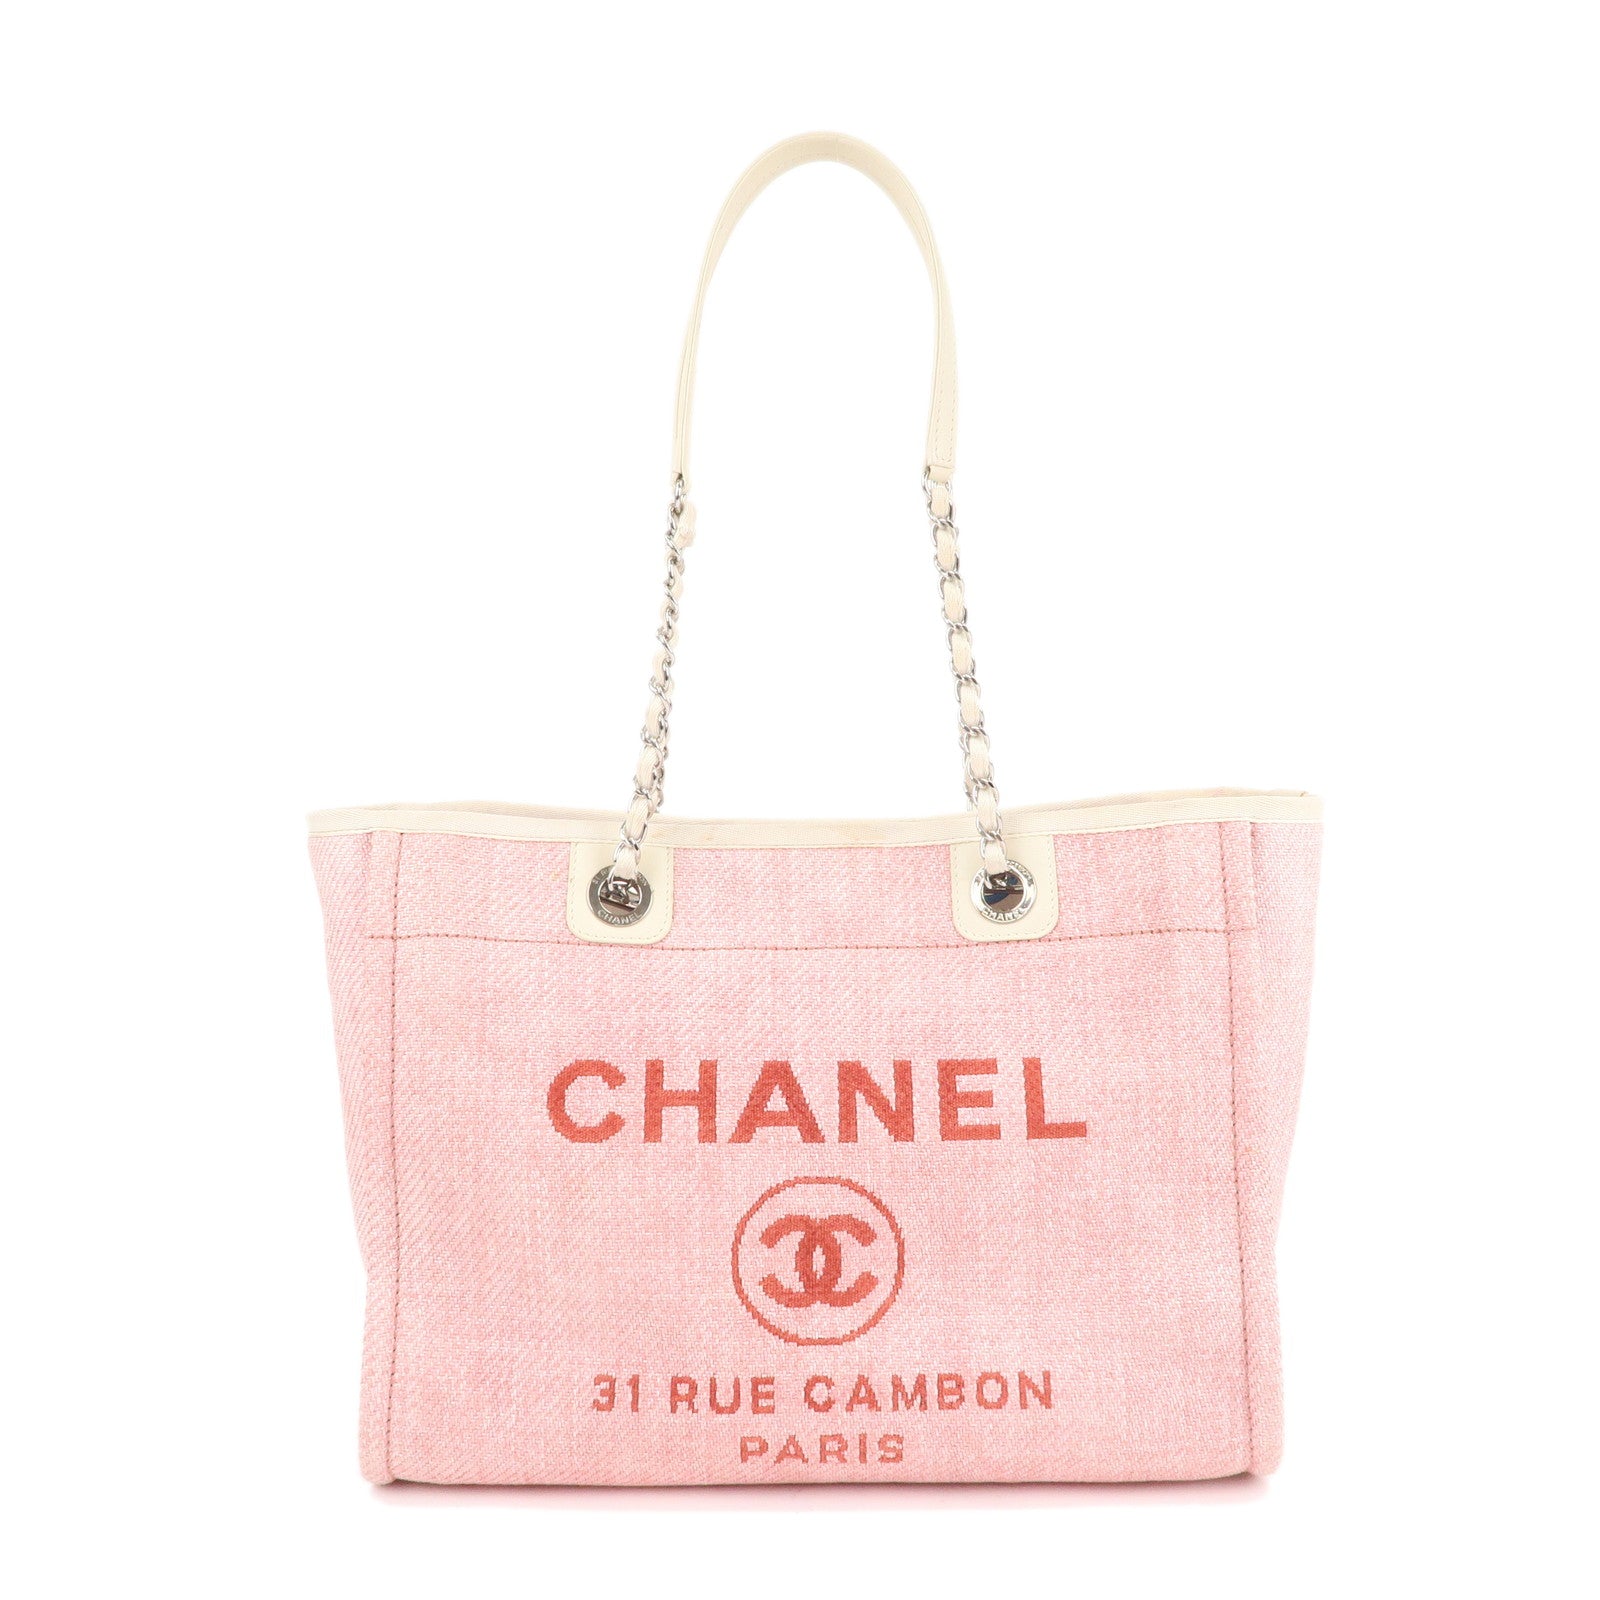 Chanel Pink Canvas and Leather Large Deauville Shopper Tote at